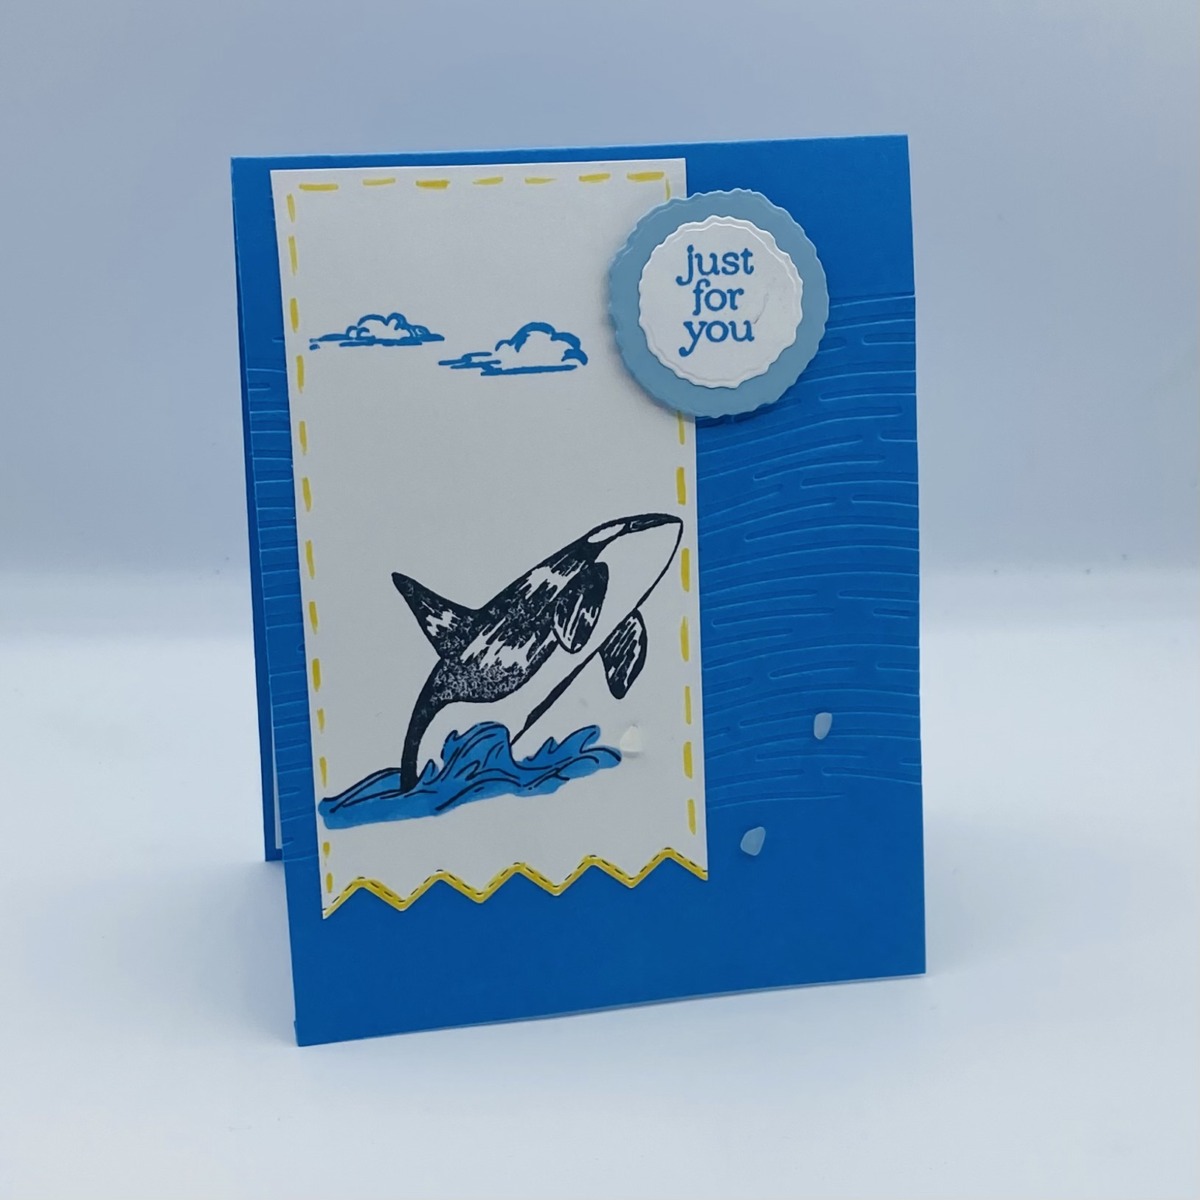 Stampin-Up-Whale-Watching-Basic-Borders-Dies-Deckled-Circle-Dies-So Sincere-just-for-you-friend-Debra-Simonis-Stampinup